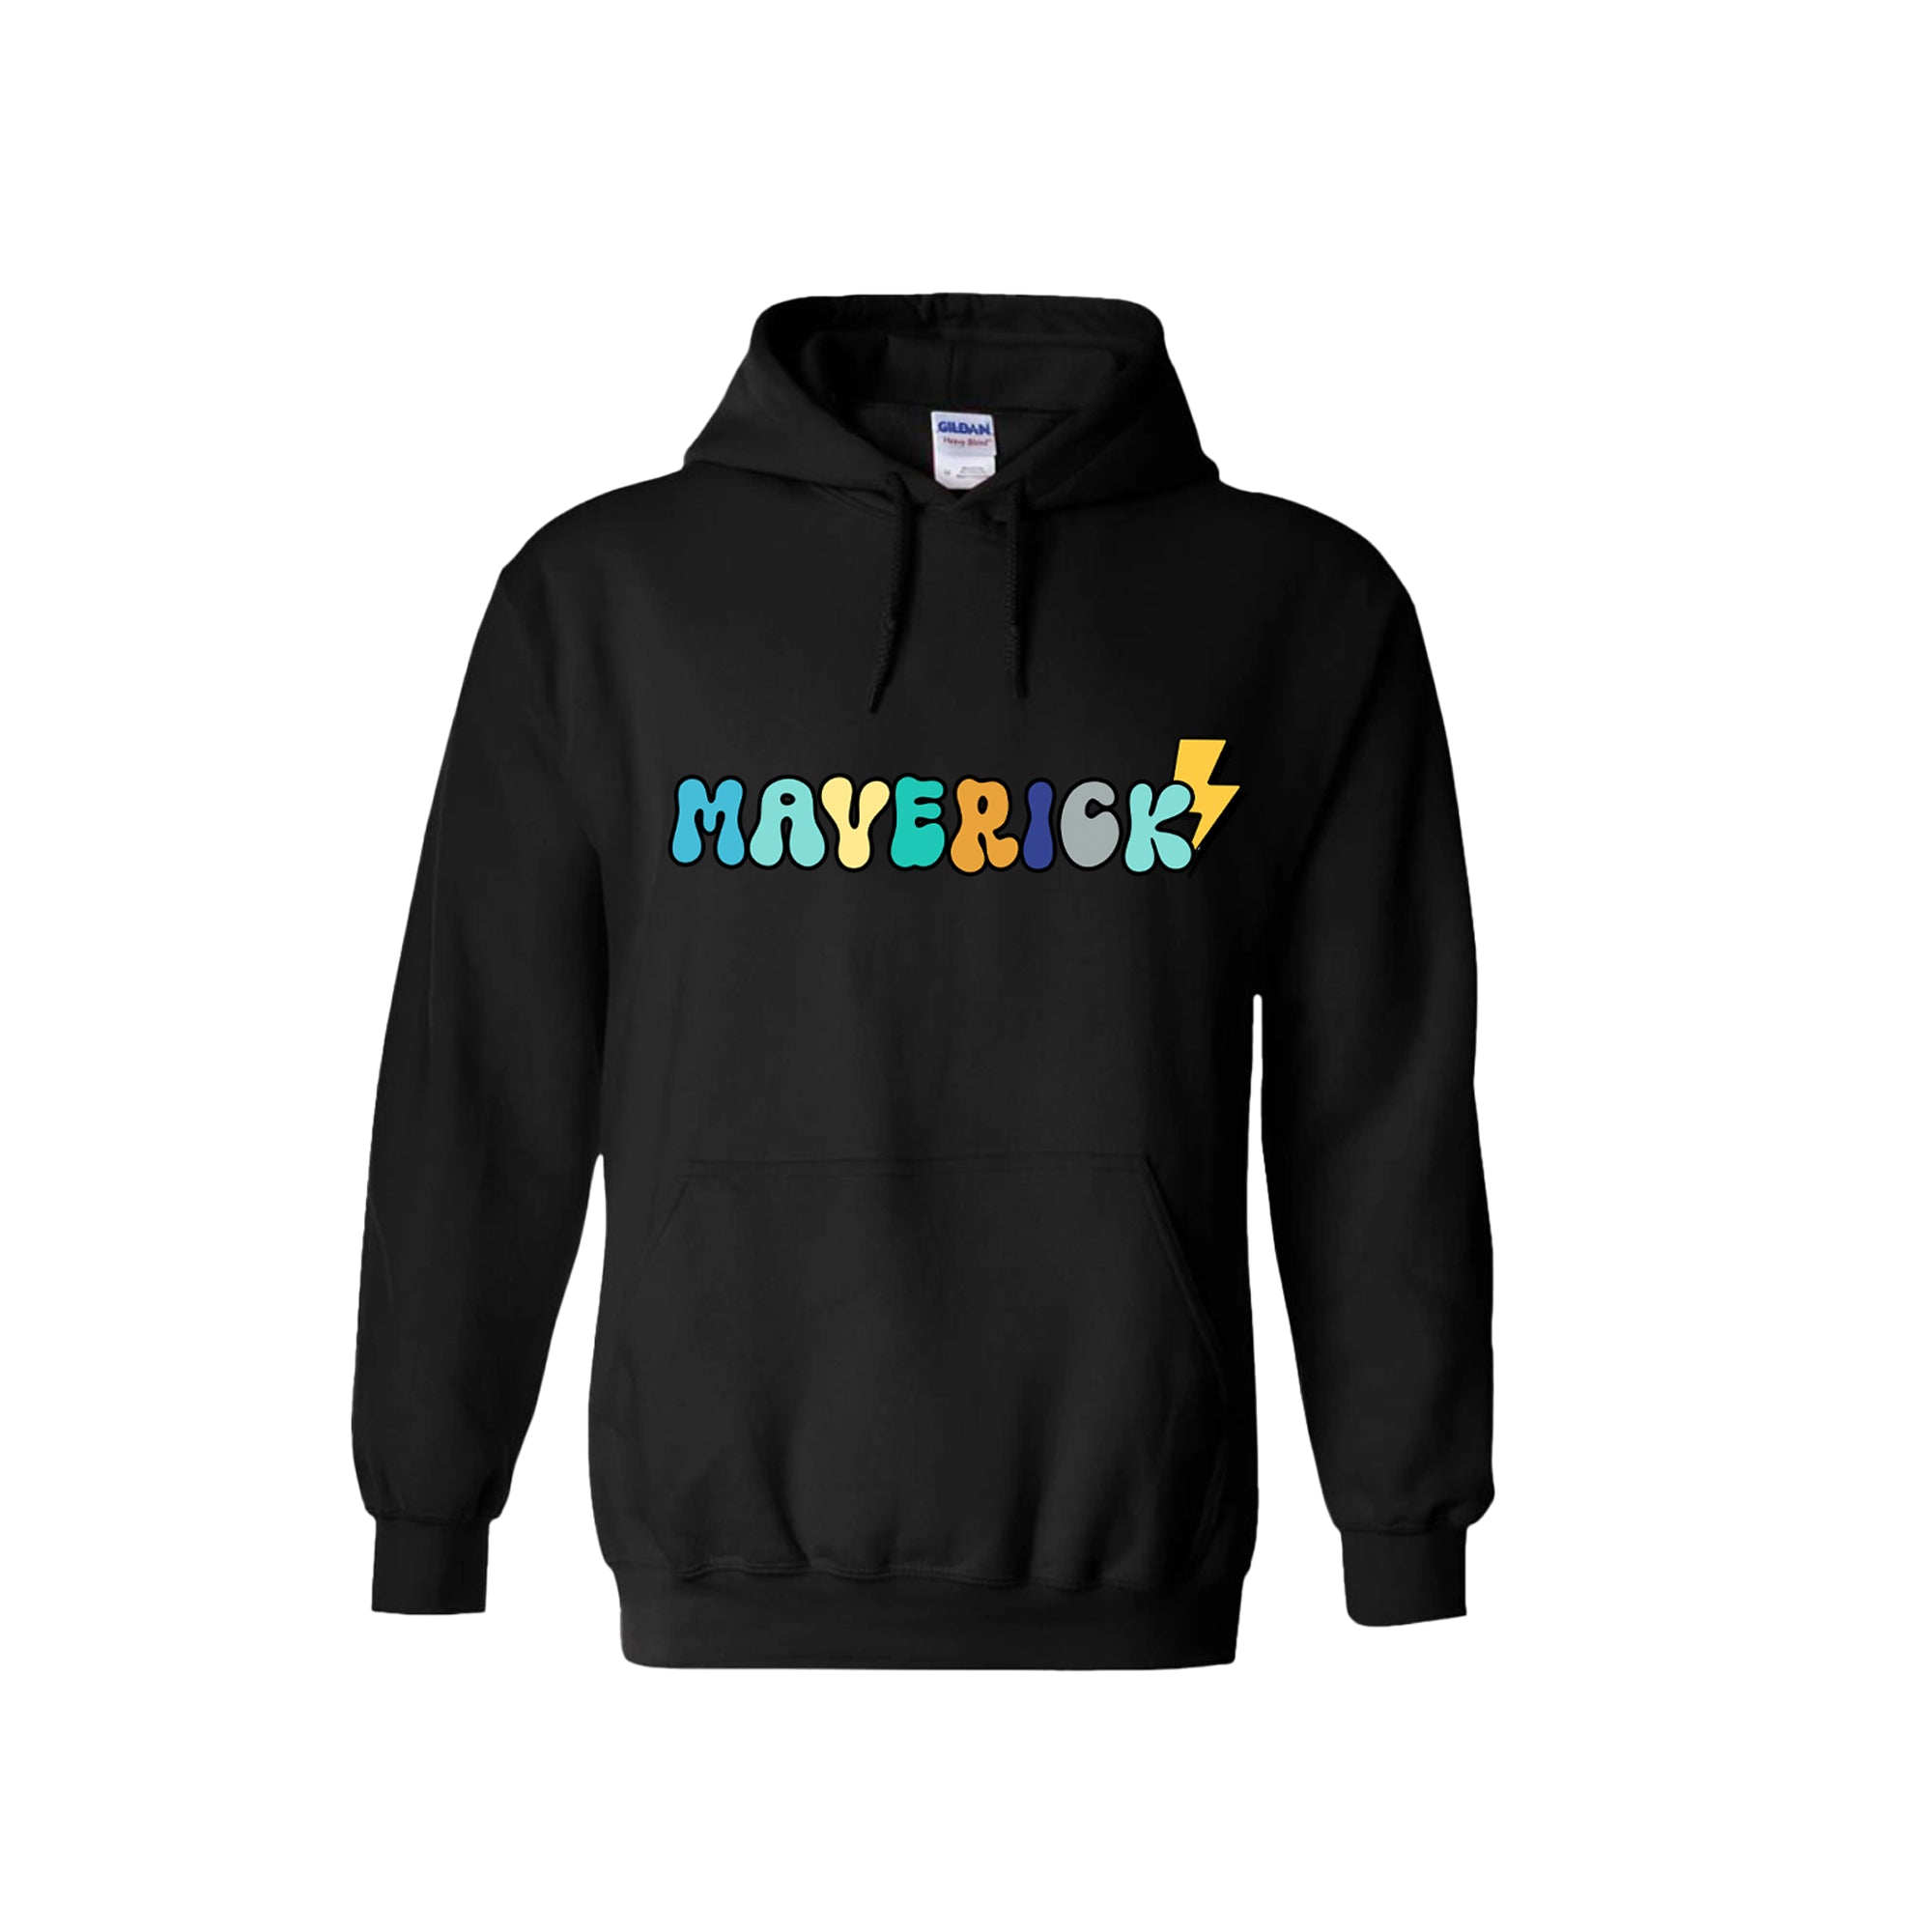 Handsome Dude - Personalized Kids Hoodie